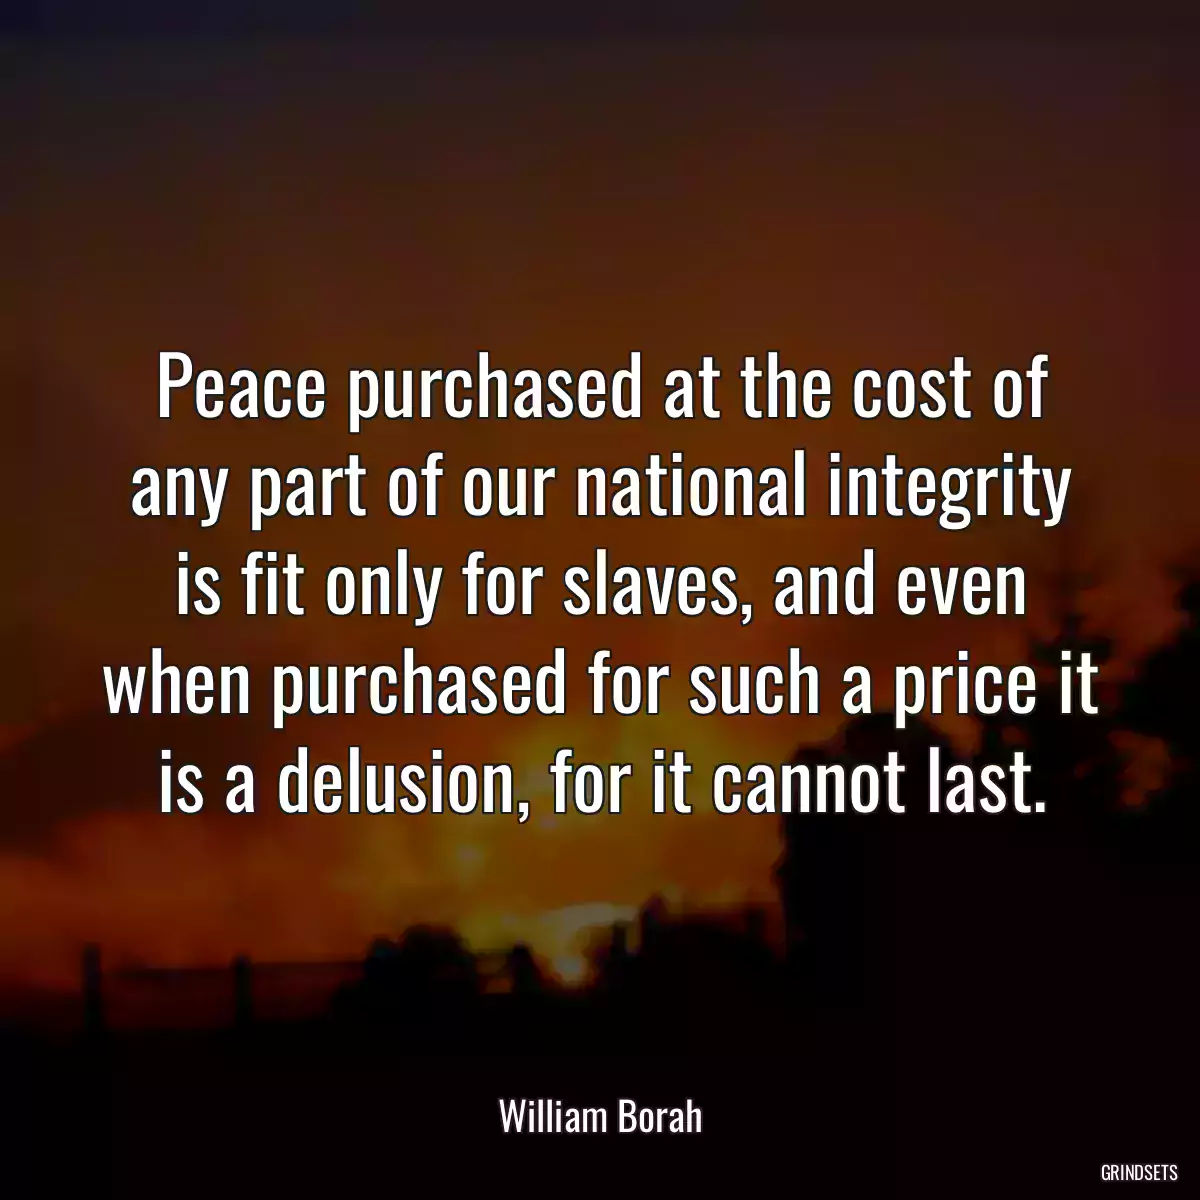 Peace purchased at the cost of any part of our national integrity is fit only for slaves, and even when purchased for such a price it is a delusion, for it cannot last.